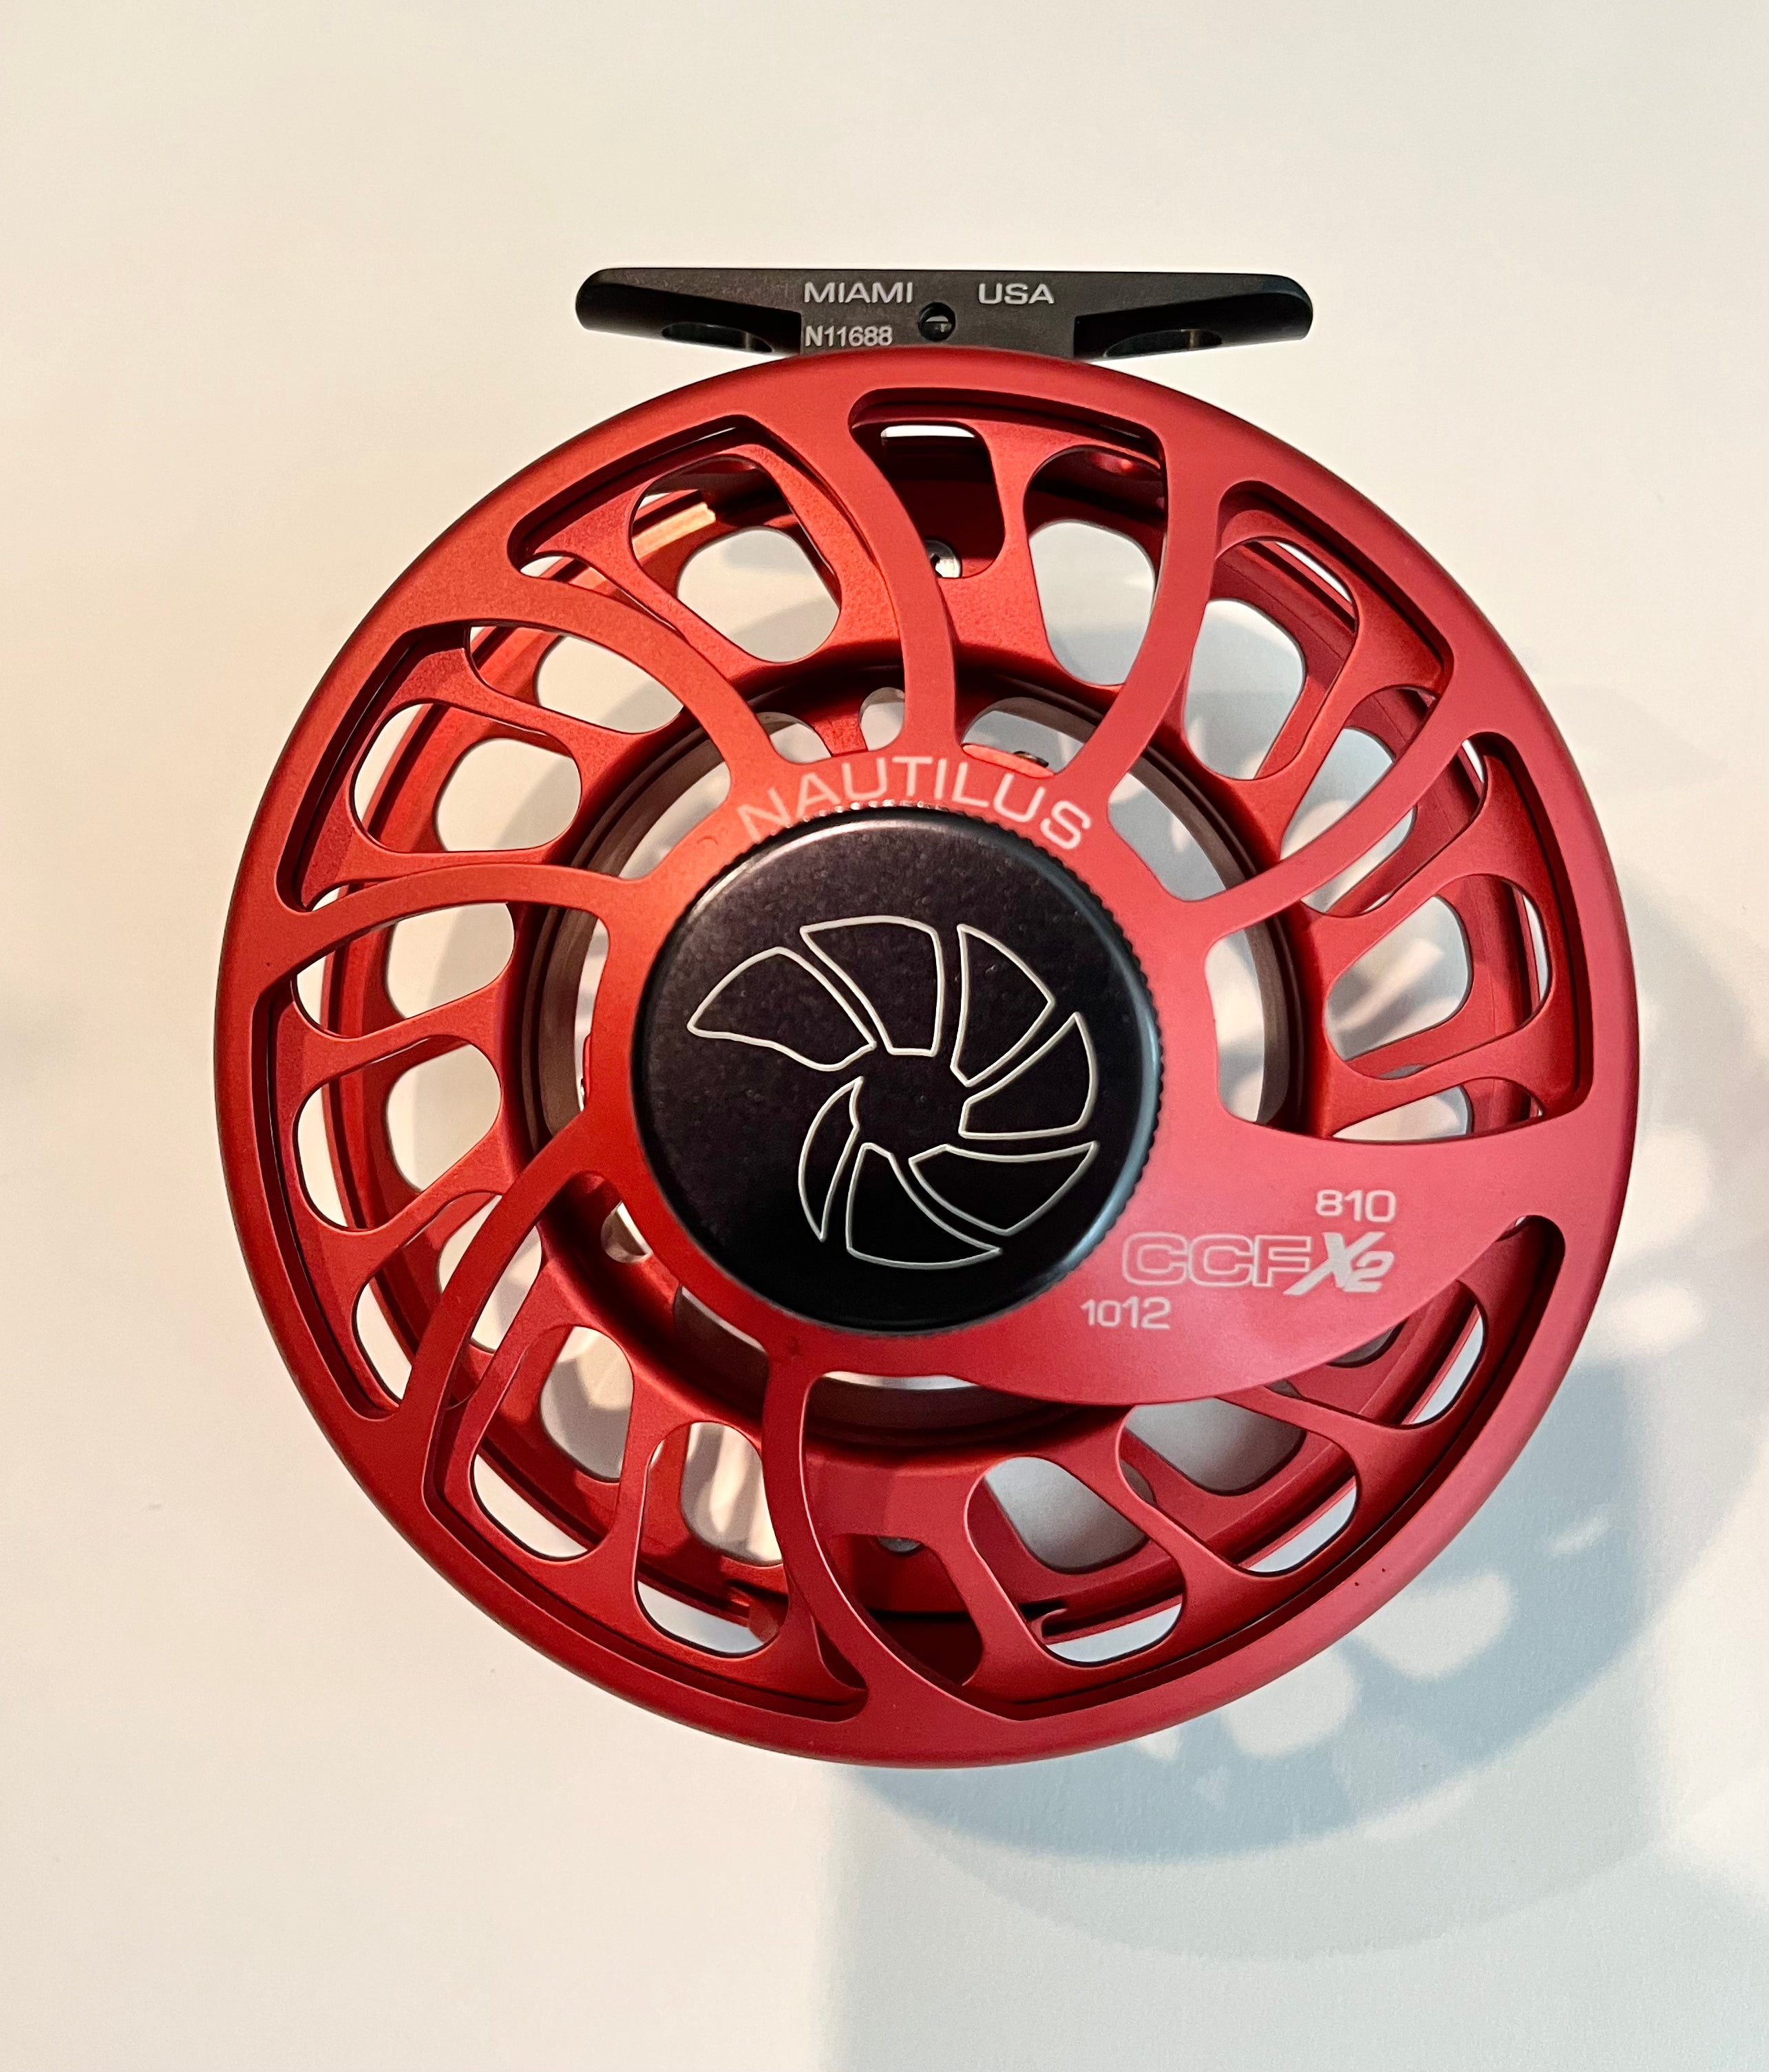 Nautilus CCF-X2 Fly Reels in Blue